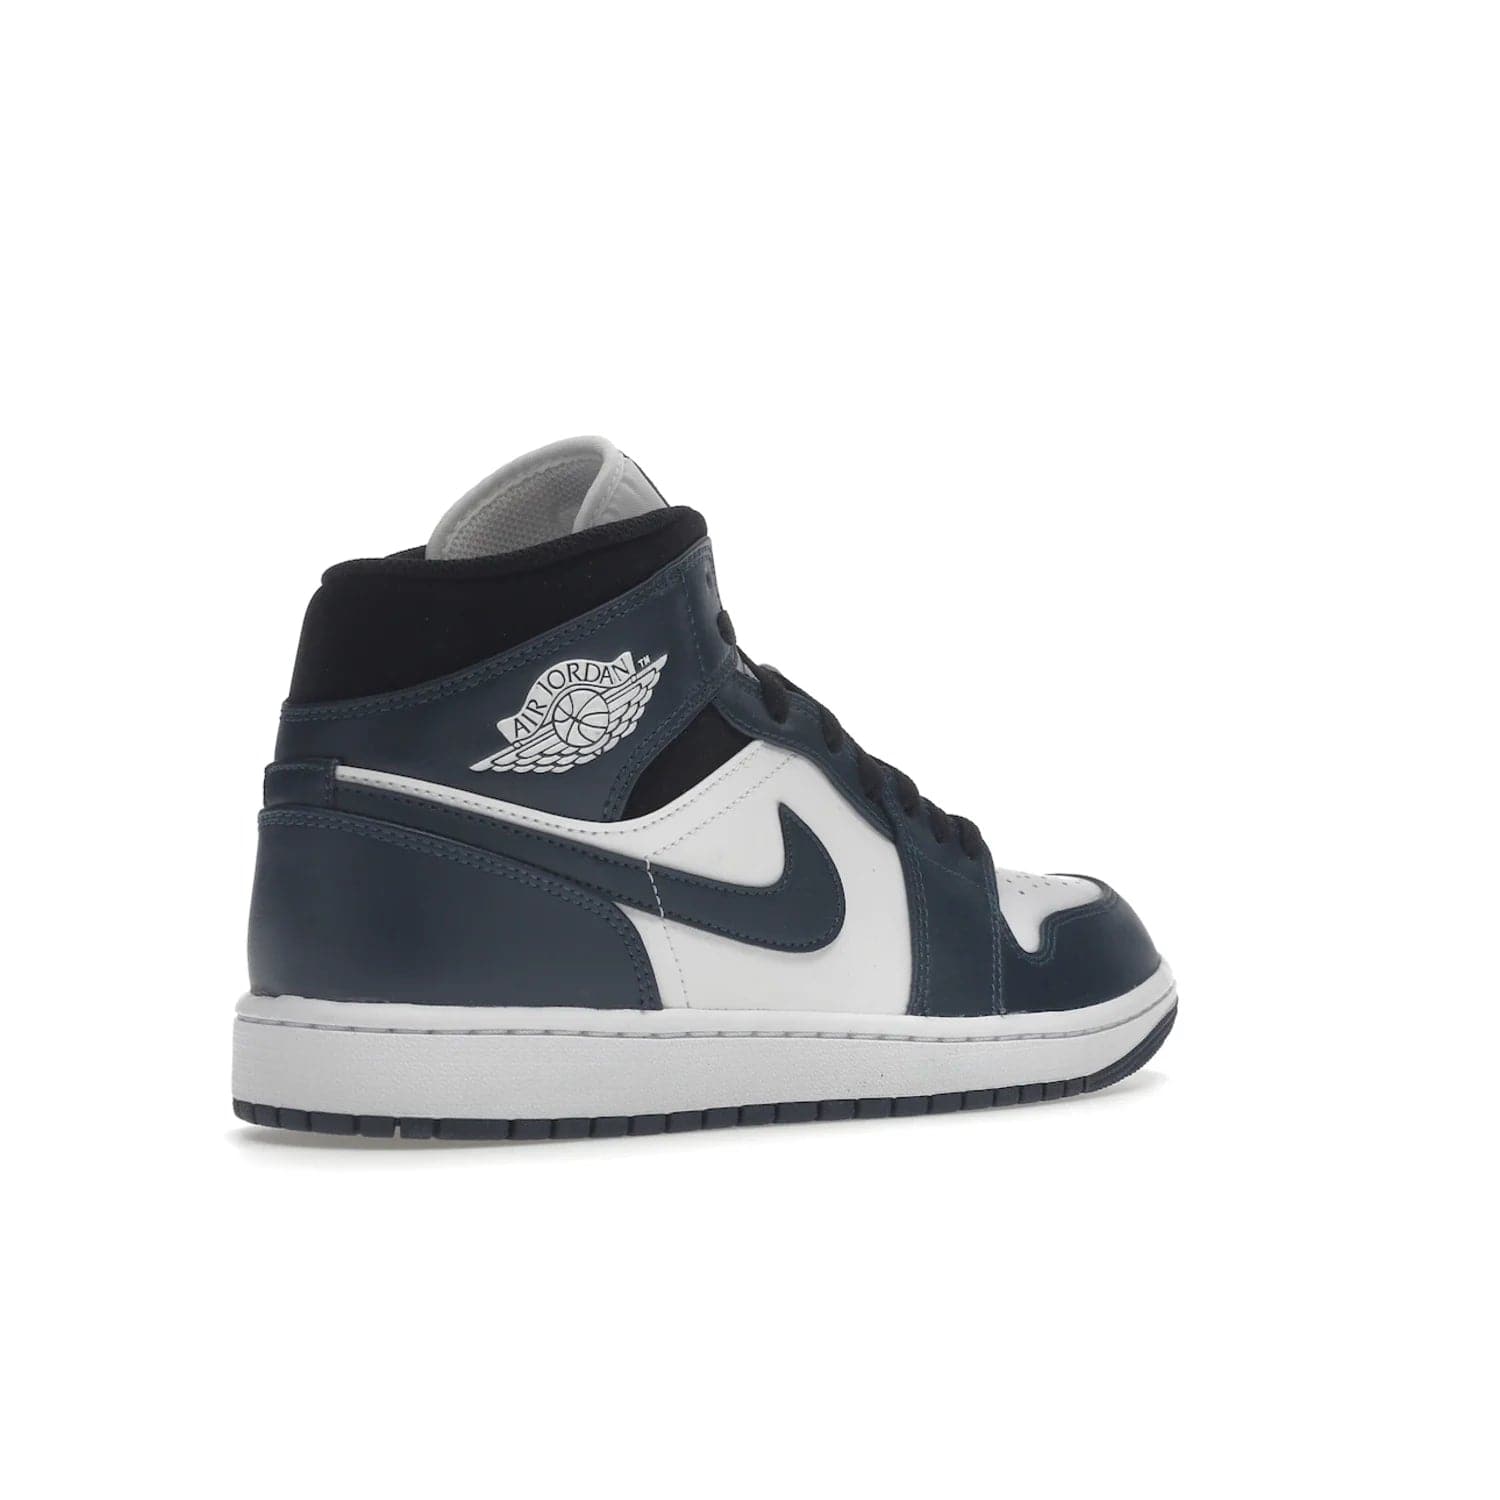 Jordan 1 Mid Armory Navy - Image 33 - Only at www.BallersClubKickz.com - The Jordan 1 Mid Armory Navy: classic basketball sneaker with soft white leather upper, deep navy blue overlays, and black leather ankle detailing. Iconic style with Jordan Wings logo and Jumpman label.